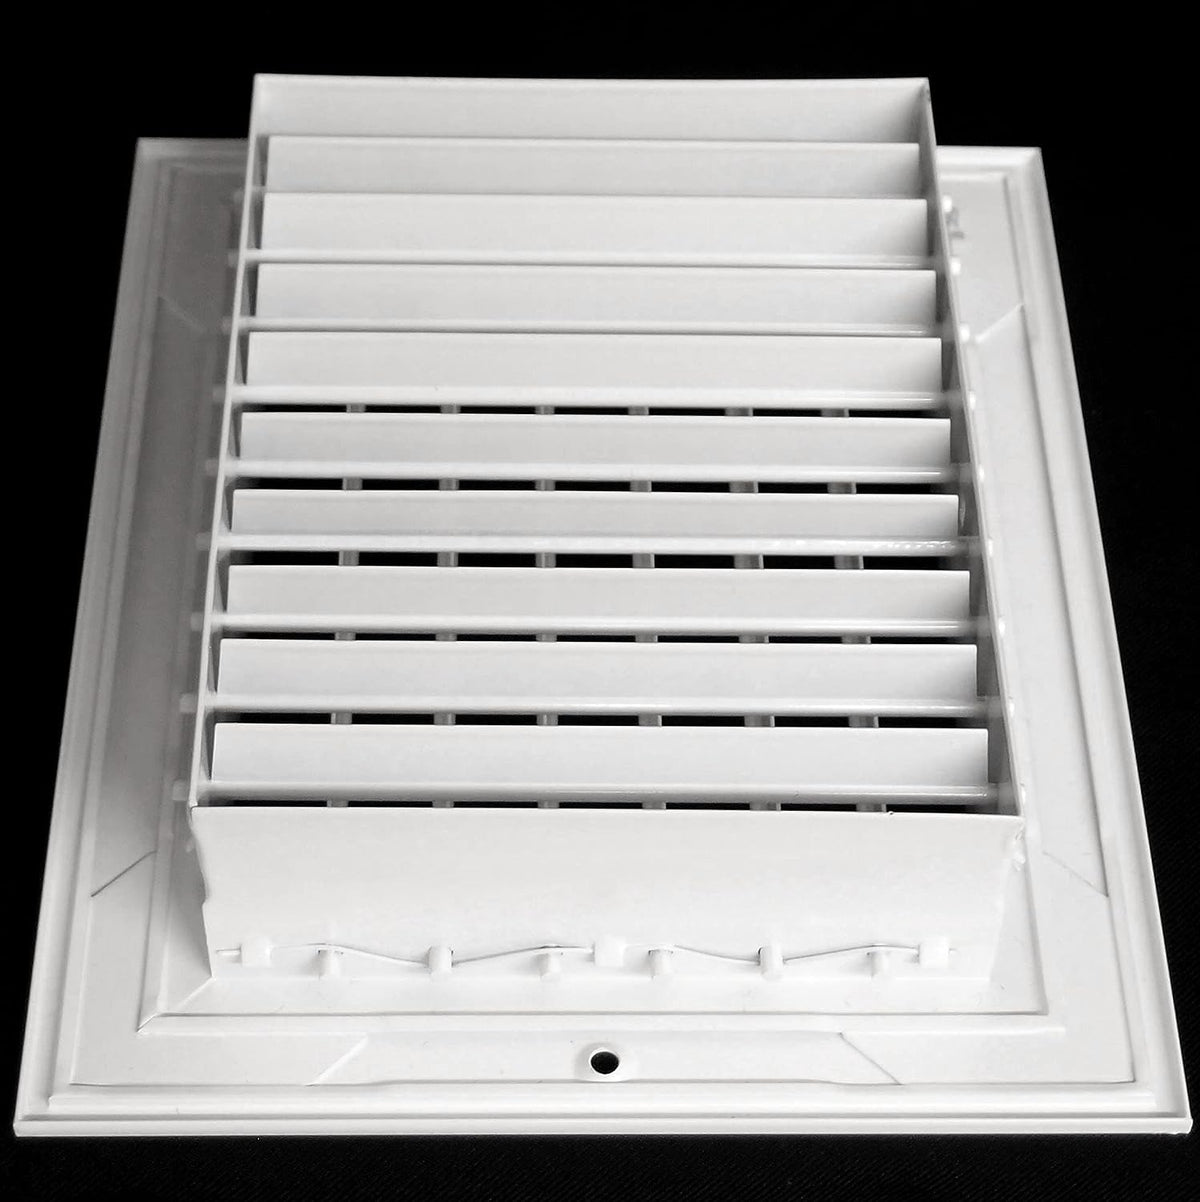 14&quot;w X 12&quot;h Aluminum Double Deflection Adjustable Air Supply HVAC Diffuser - Full Control Vertical/Horizontal Airflow Direction